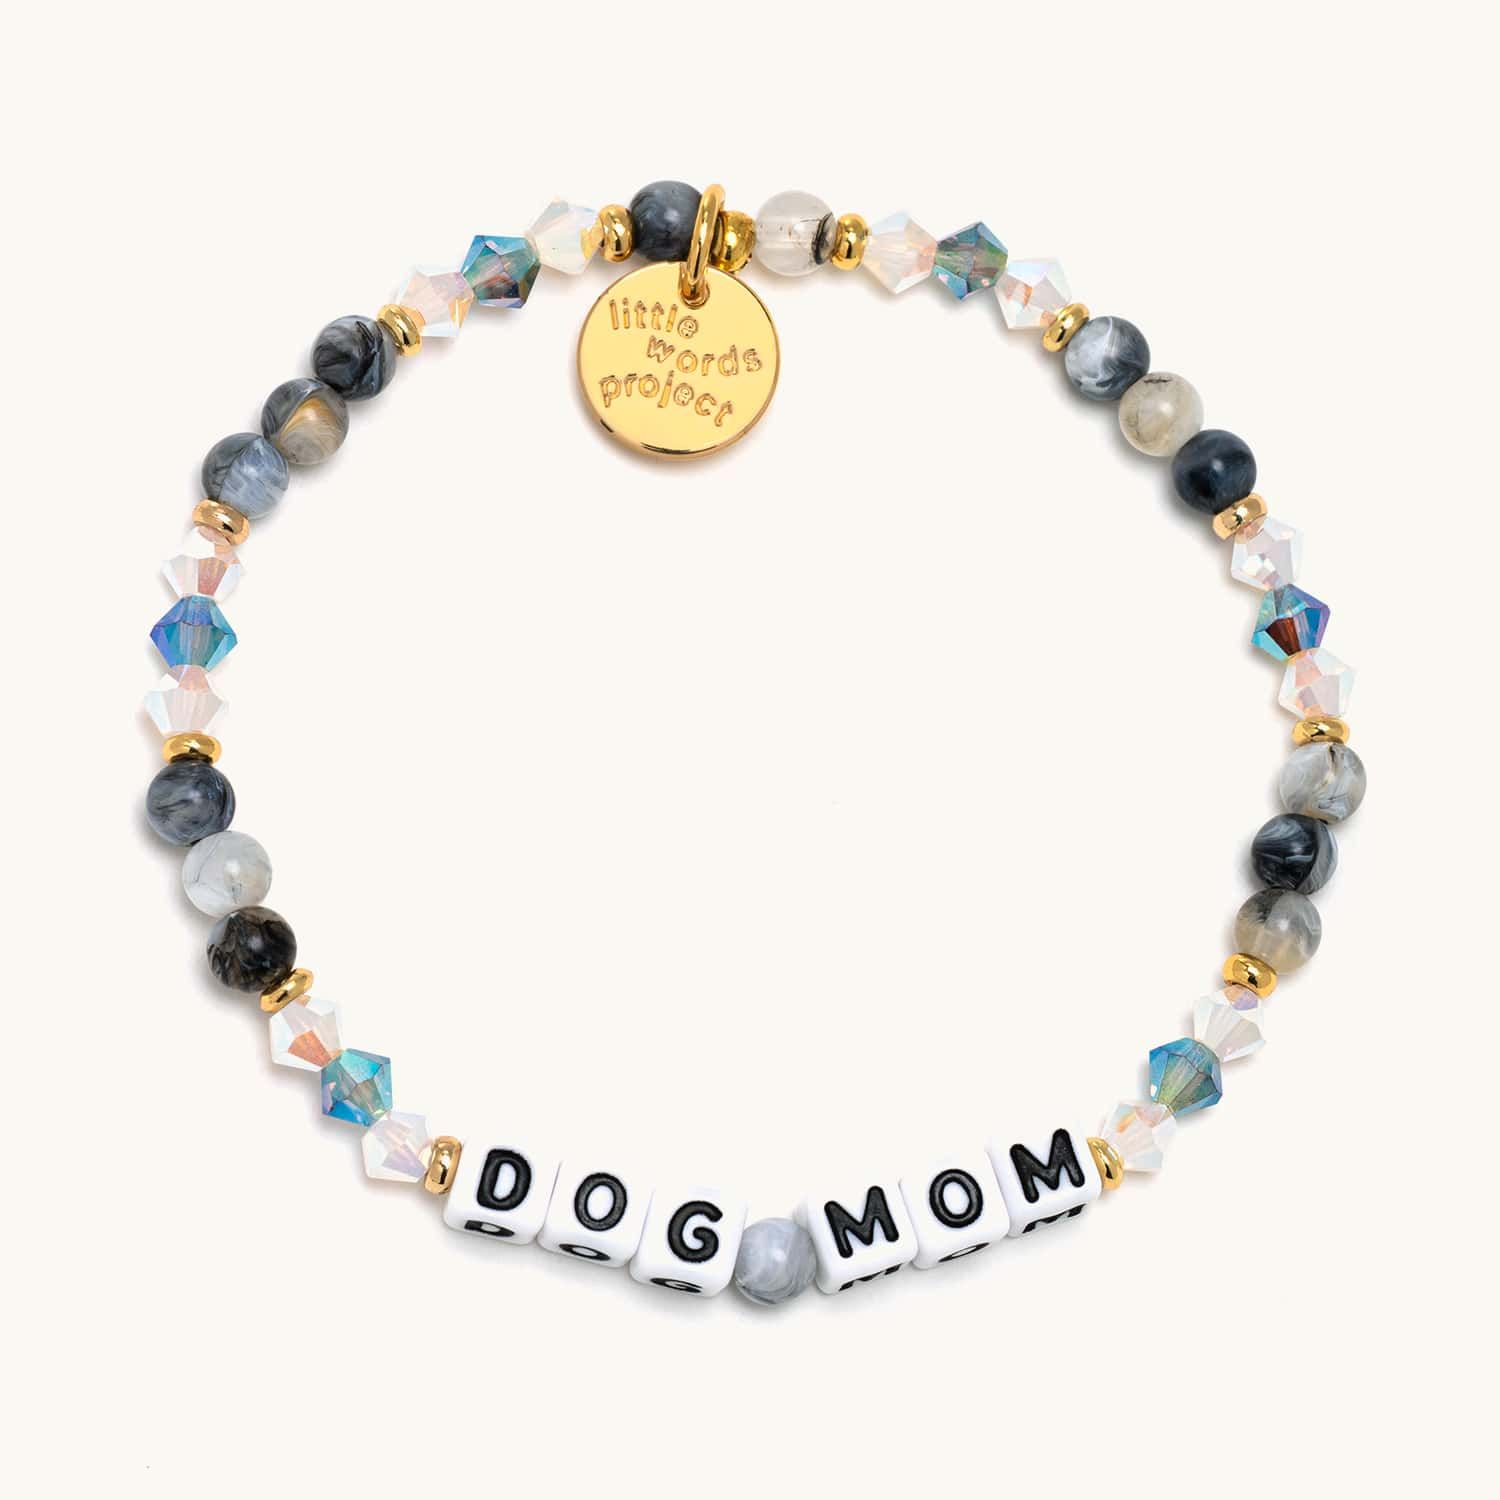 Dog Mom- Family | Little Words Project